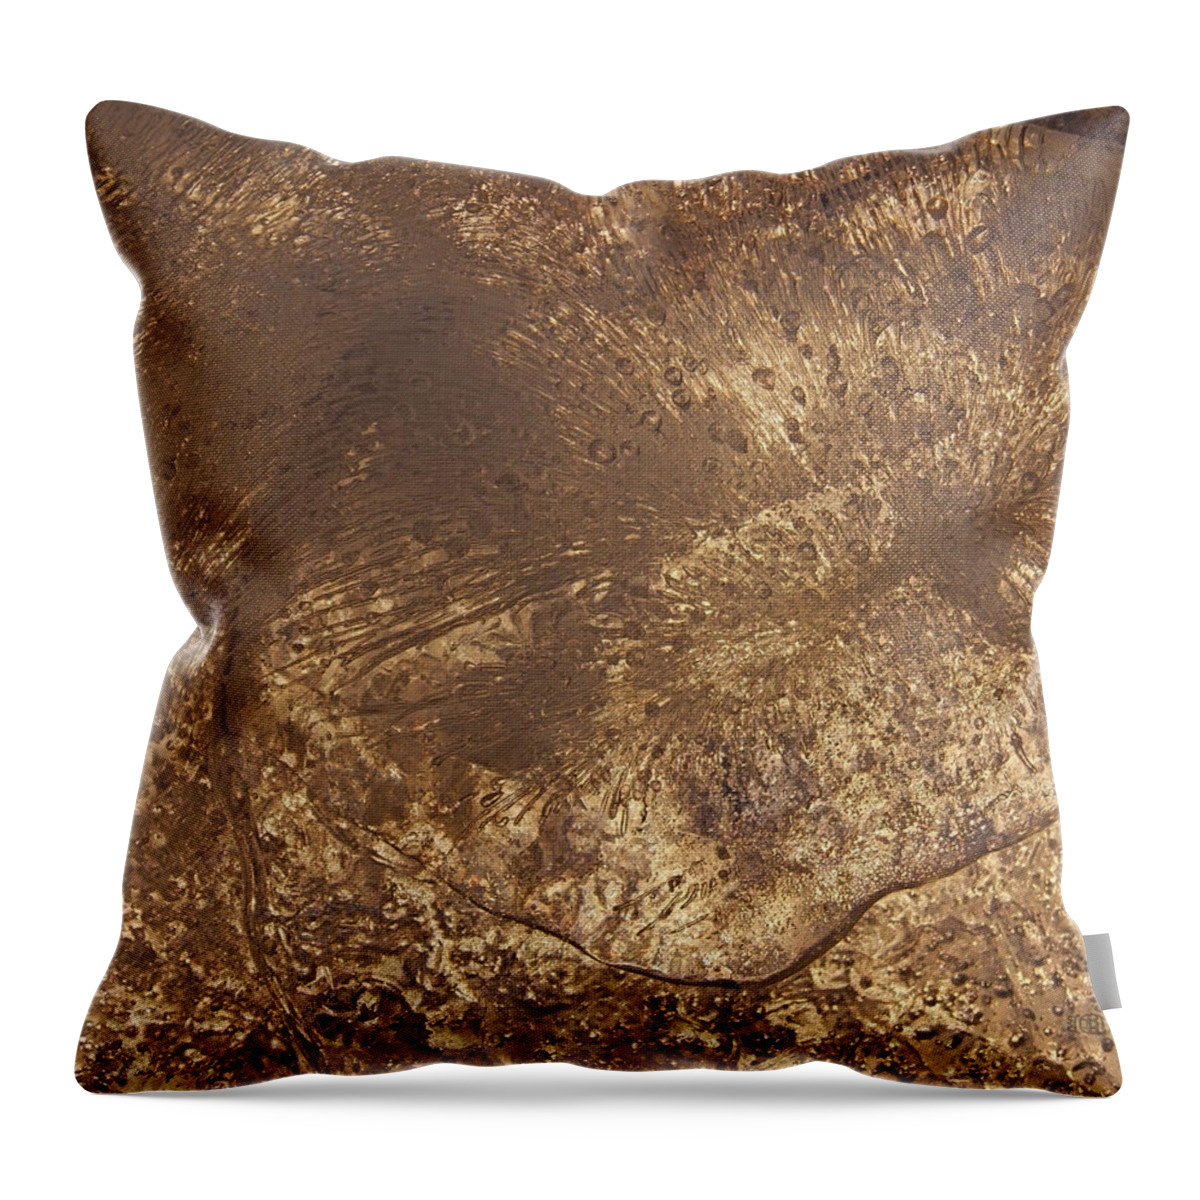 Ice Leaf Throw Pillow featuring the photograph Ice Leaf by Sami Tiainen